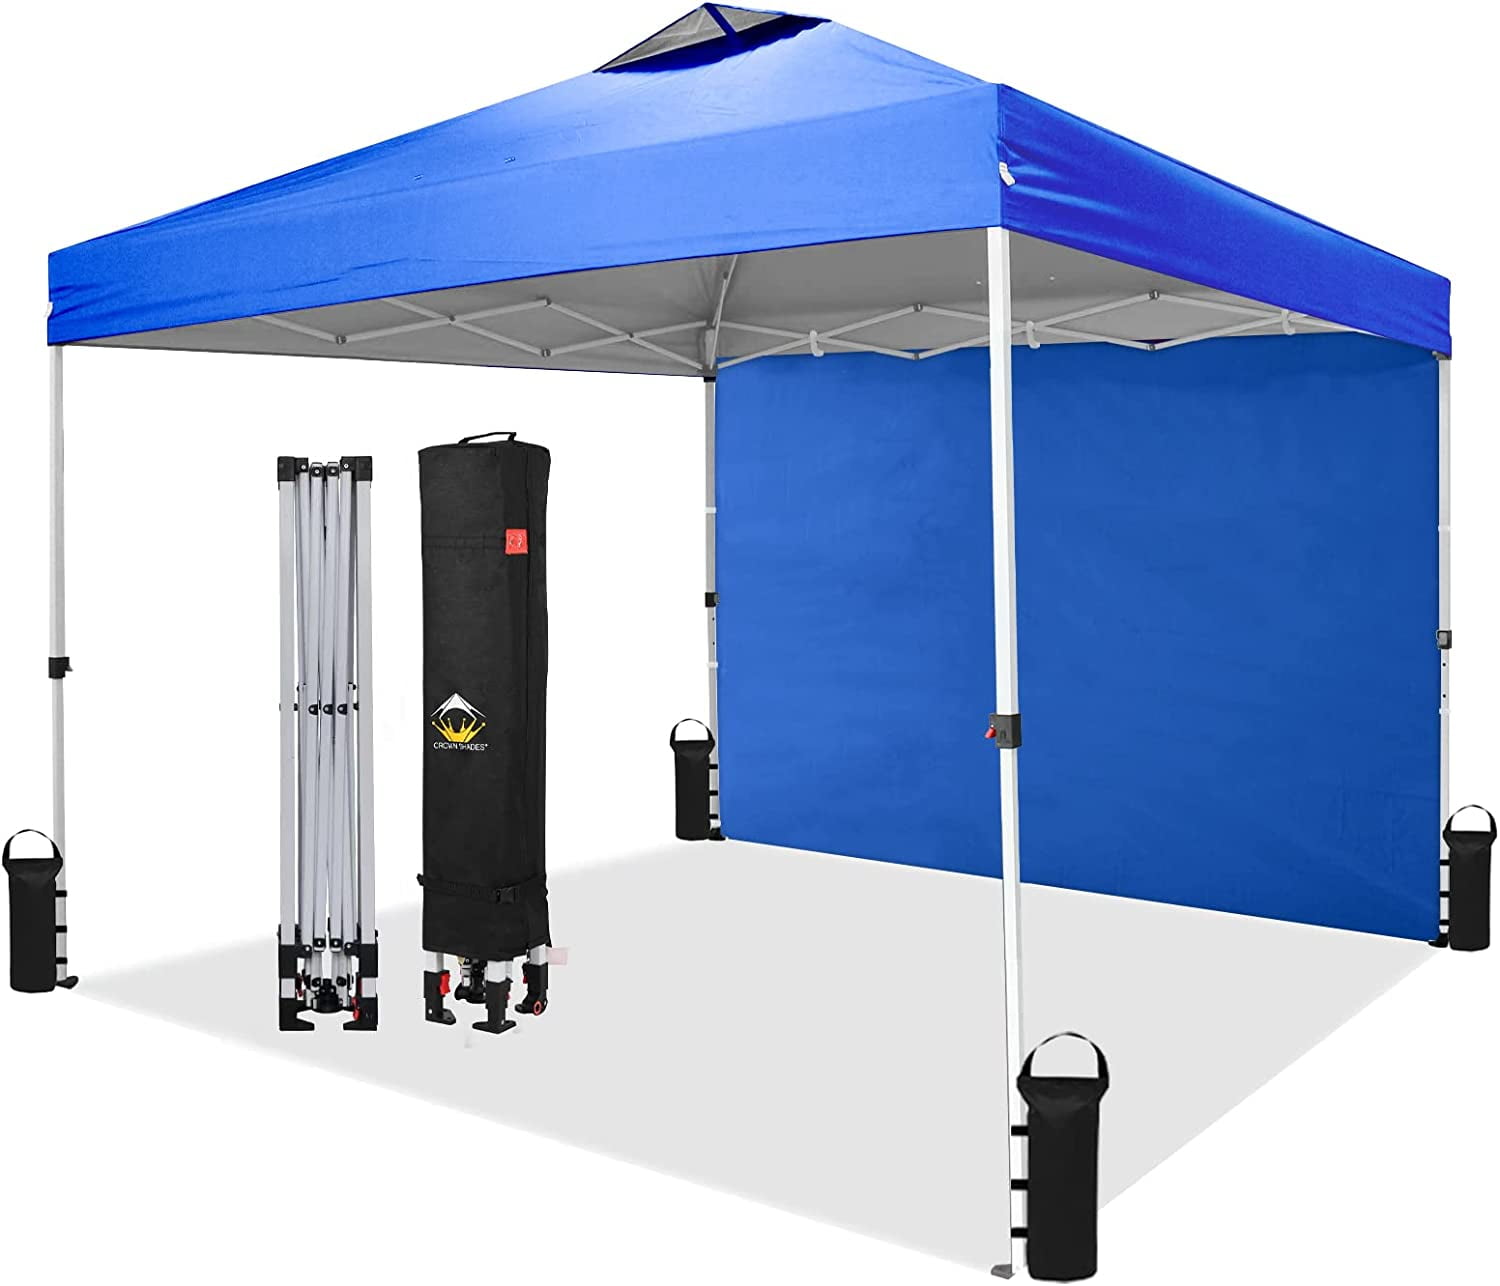 Crown Shades 10x10ft Instant Pop Up Folding Shade Canopy w/Carry Bag, Blue  